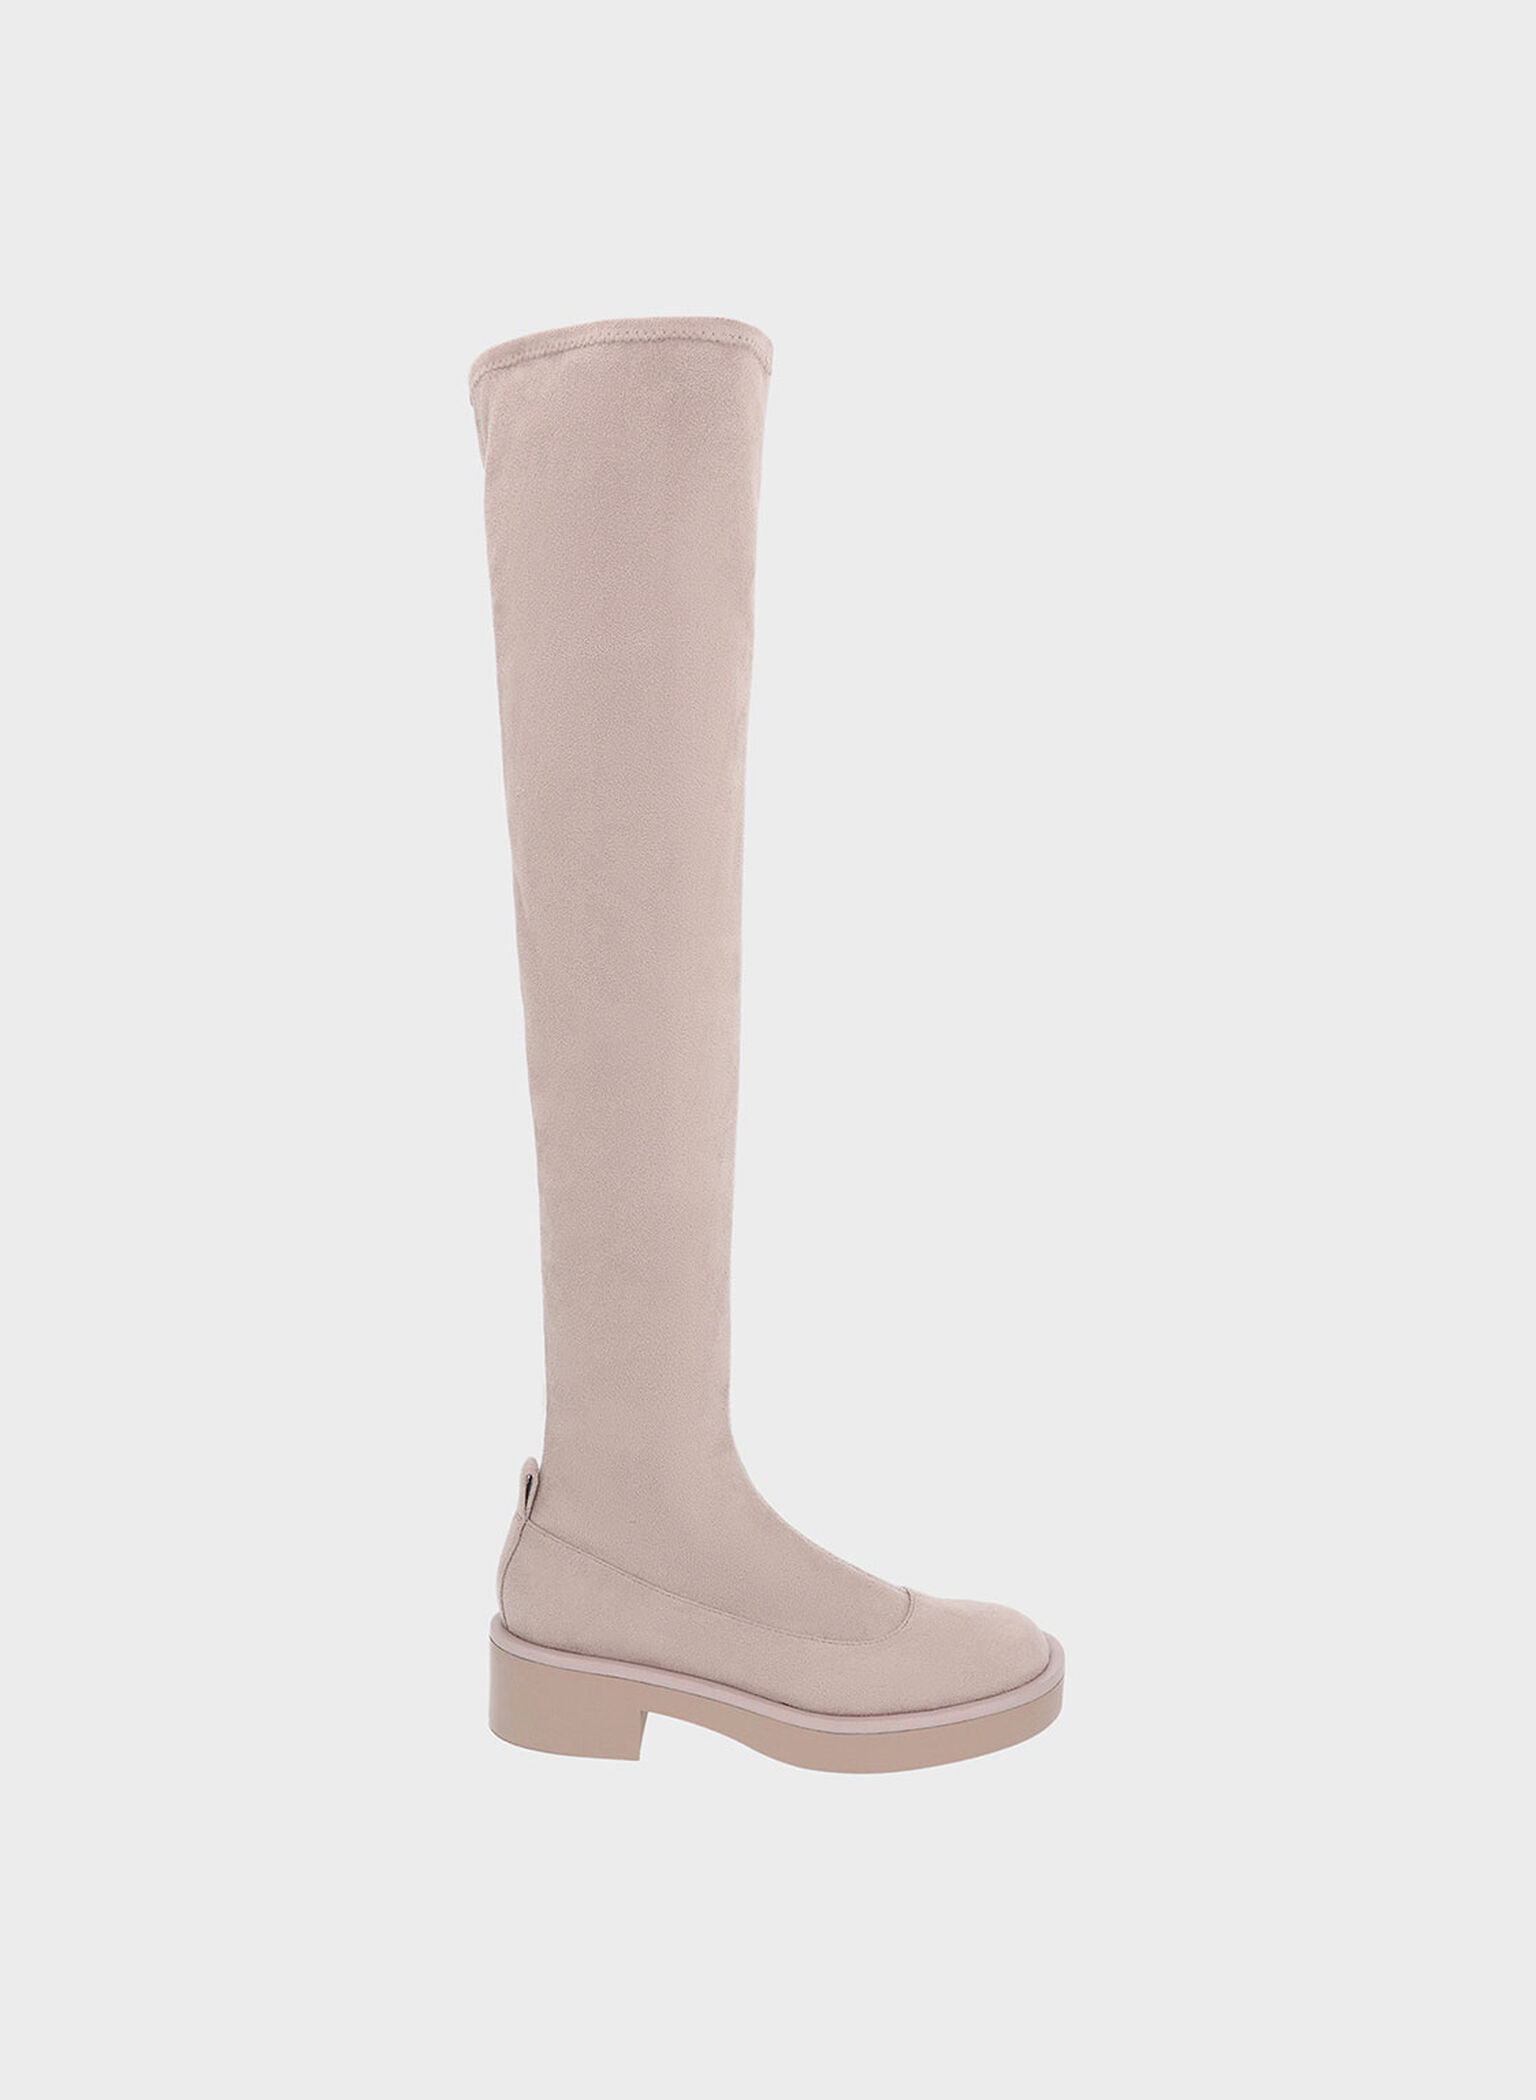 Textured Thigh-High Block Heel Boots, Taupe, hi-res